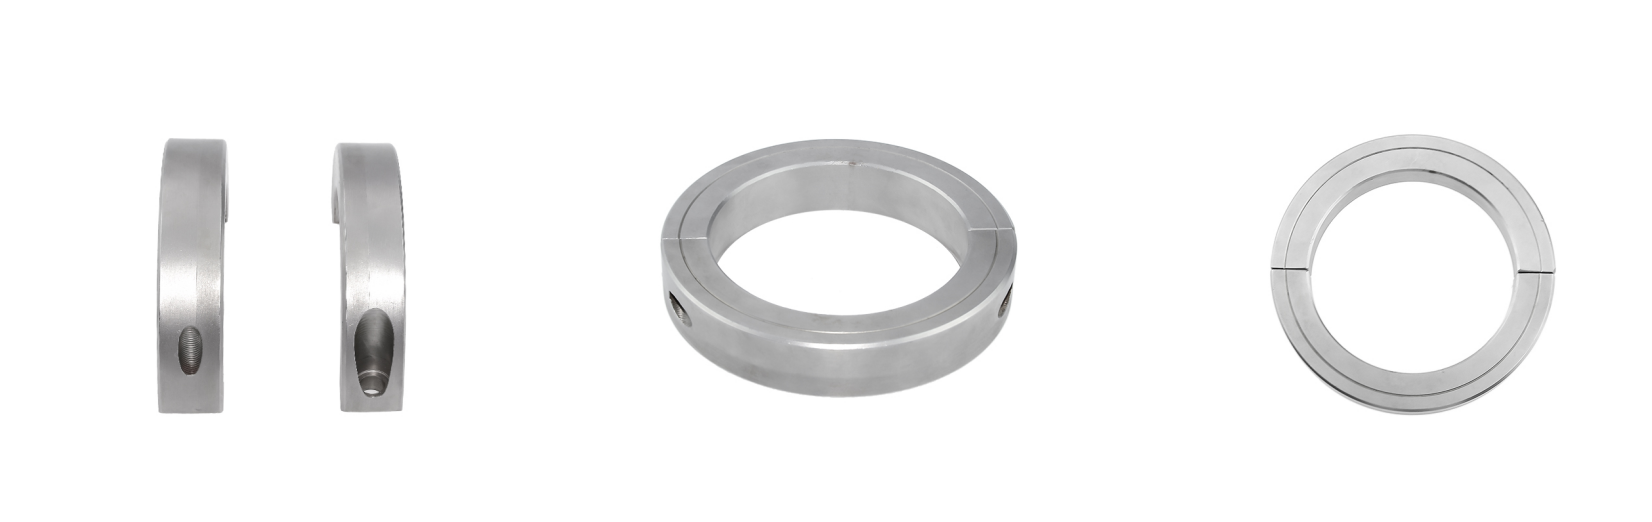 Shaft clamp sleeve bearing fixed ring limit ring shaft Shaft Collars